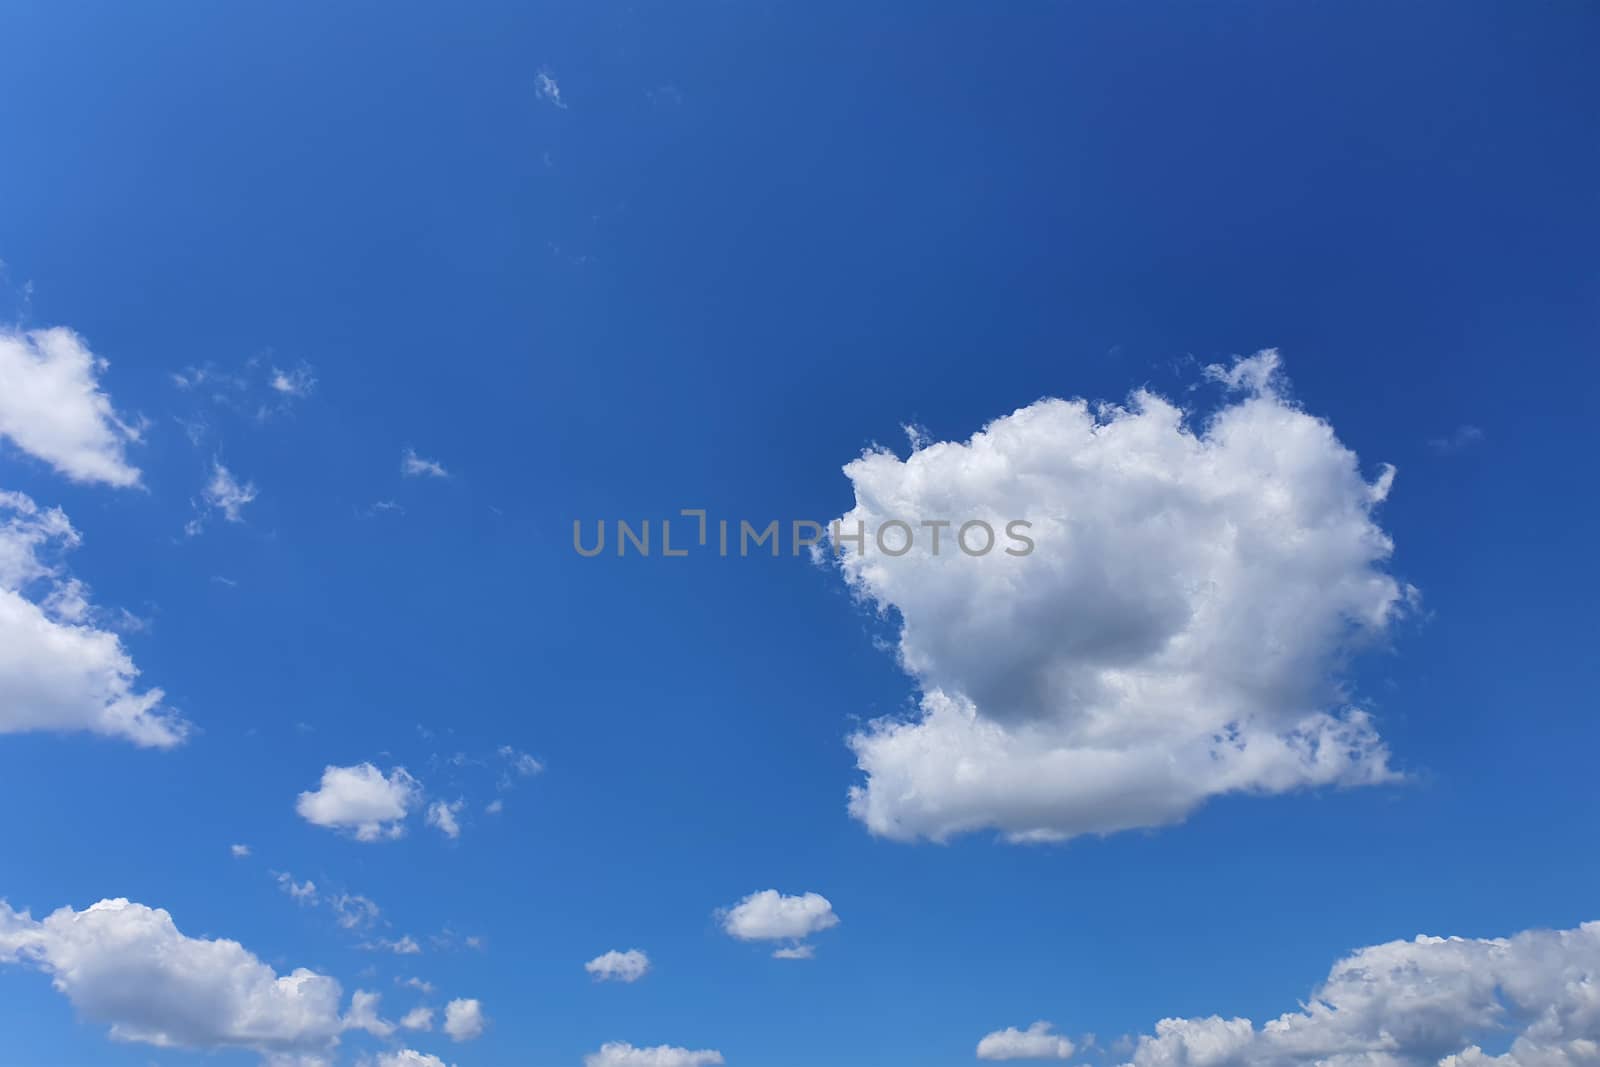 white clouds on blue sky background, design element